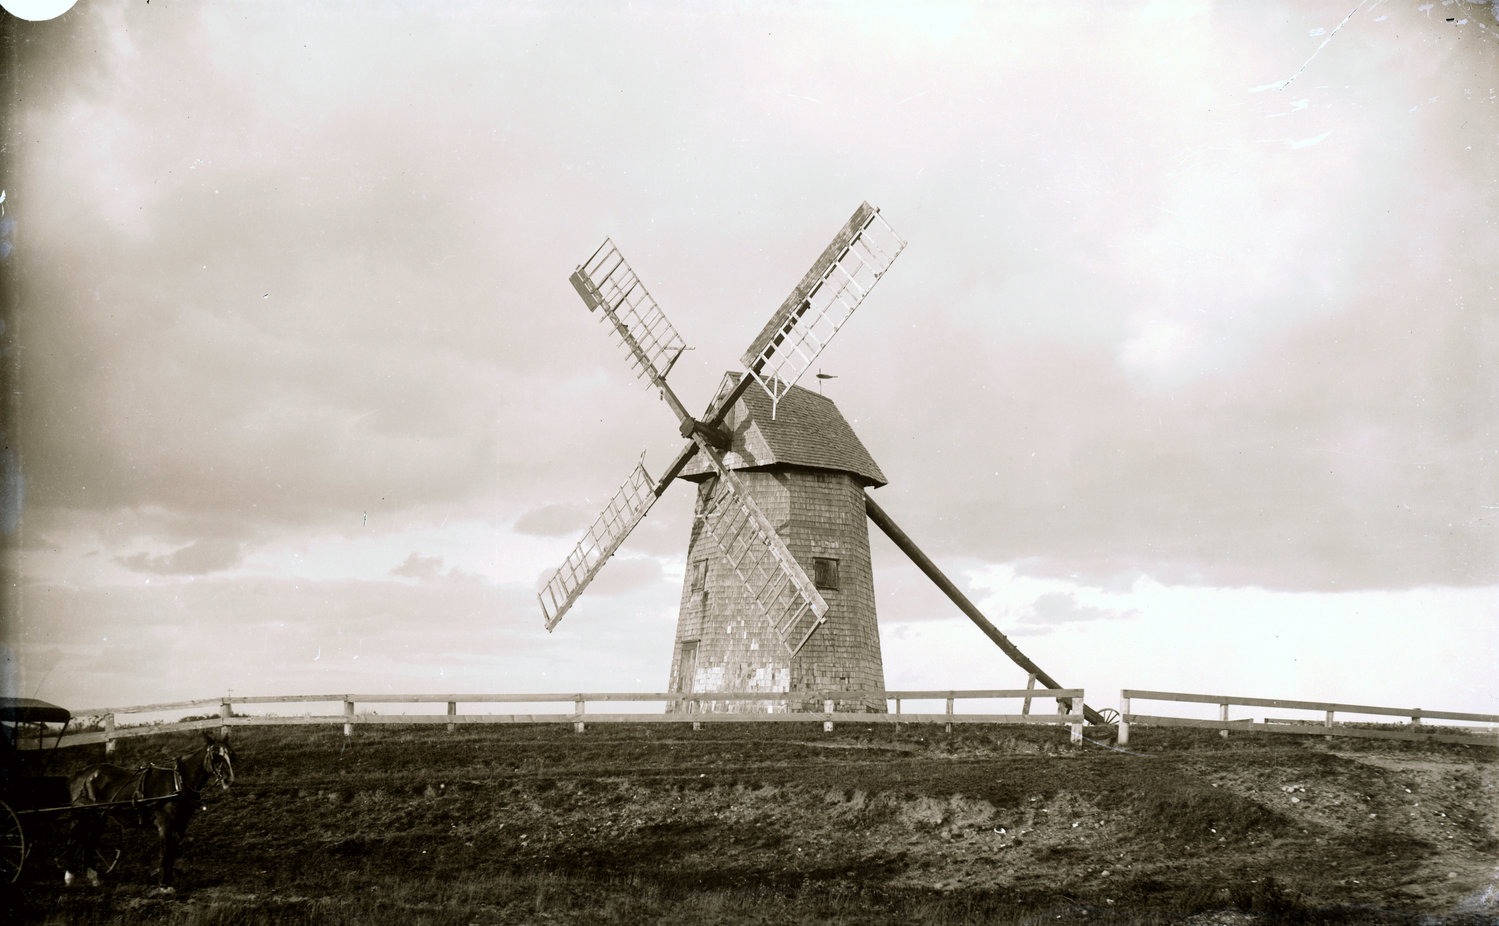 The Old Mill, circa 1900.